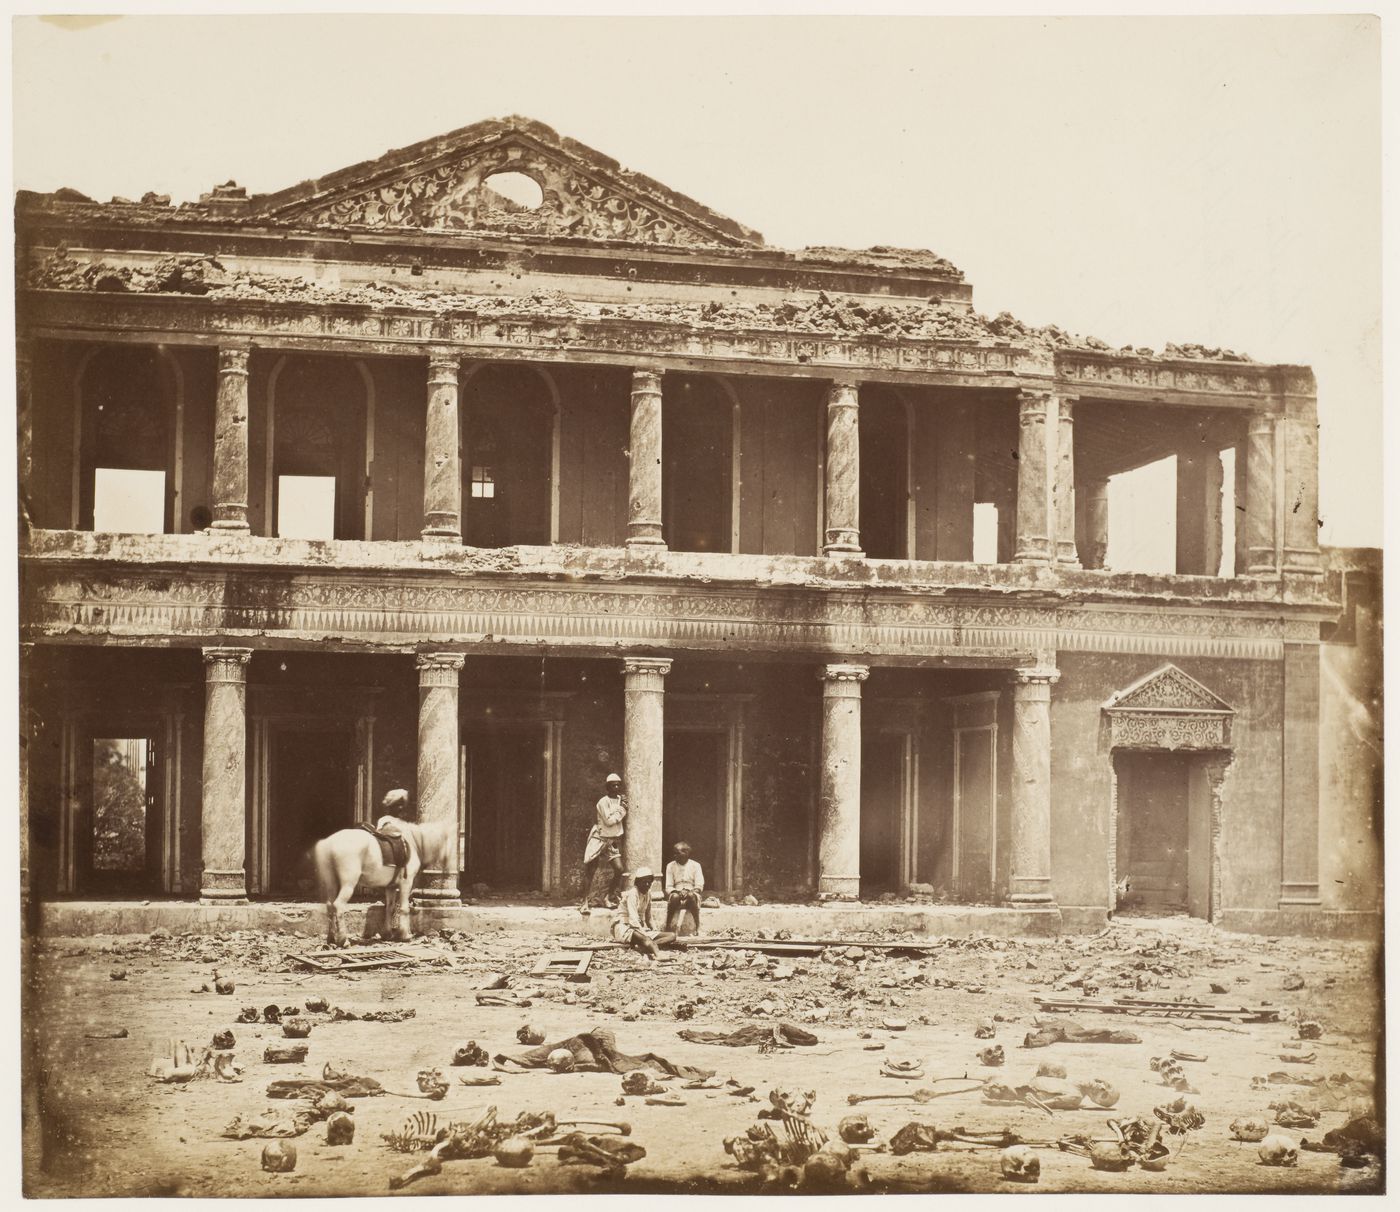 View of the ruins of Sikandarbagh Palace showing the skeletal remains of rebels in the foreground, Lucknow, India